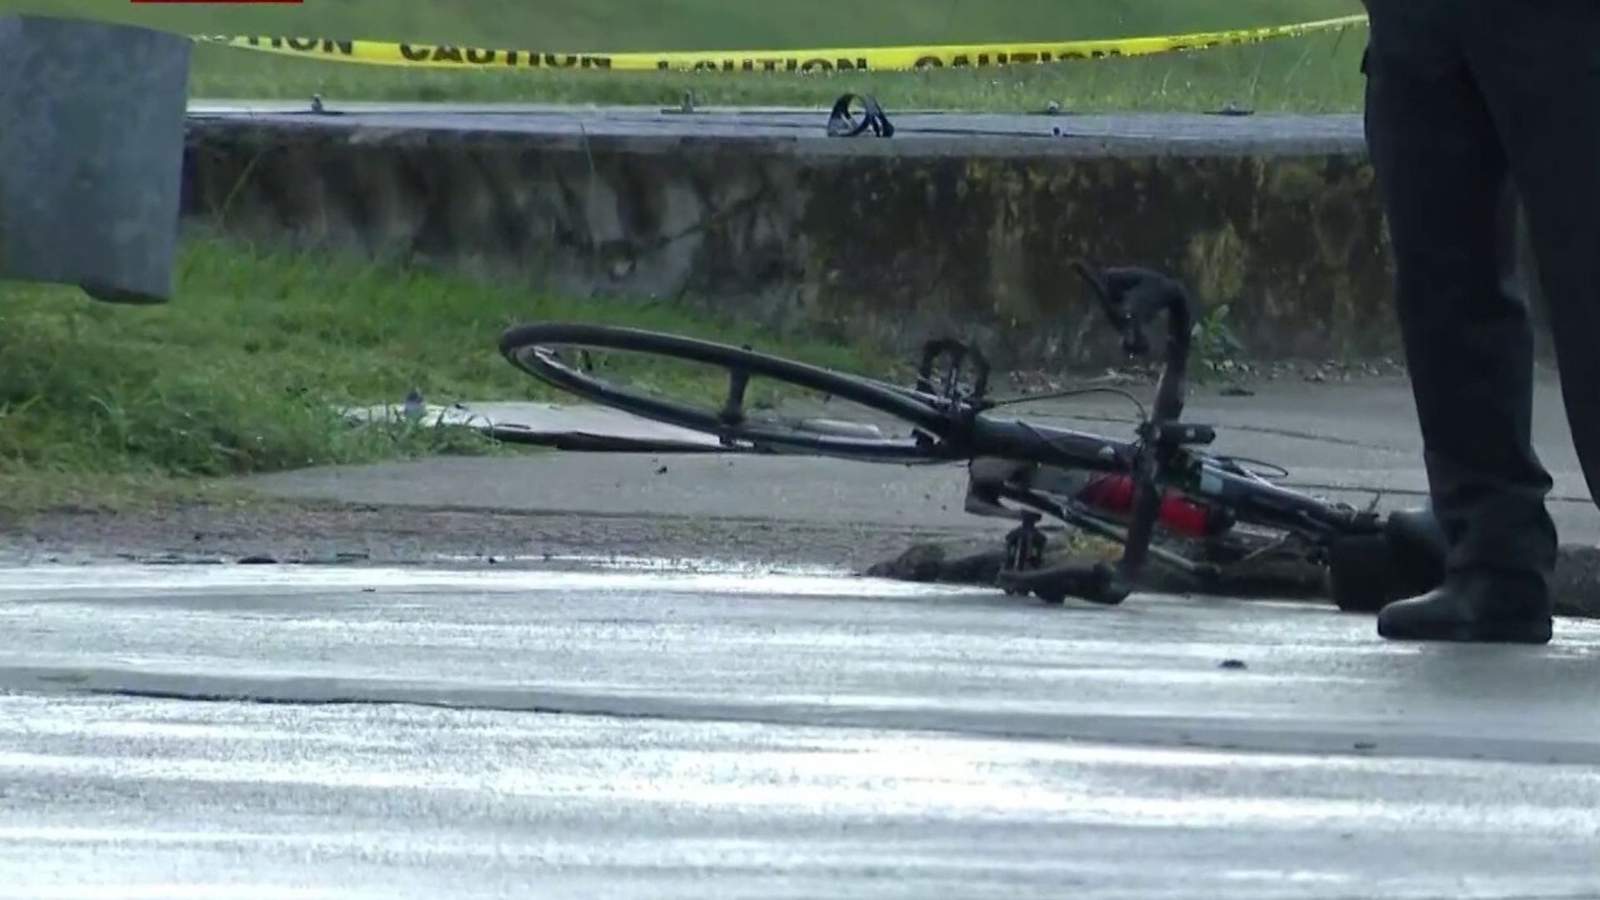 Bicyclist killed in hit-and-run crash in Meyerland area, police say